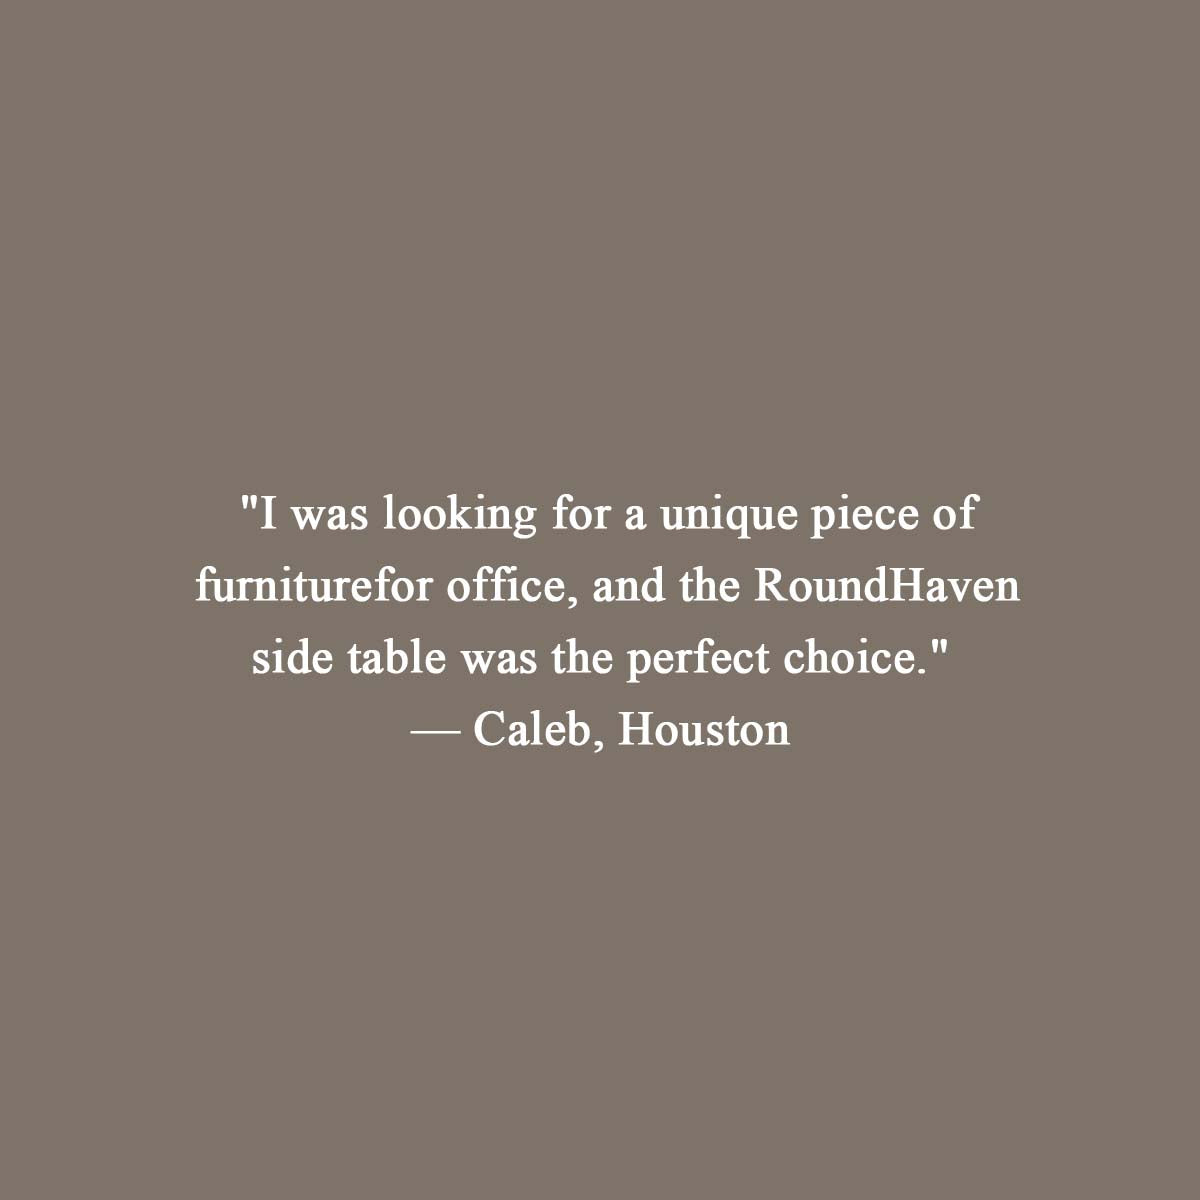 OIXDESIGN Customer Review, RoundHaven Side Table, Italian Classico Travertine, Caleb from Houston. jpg